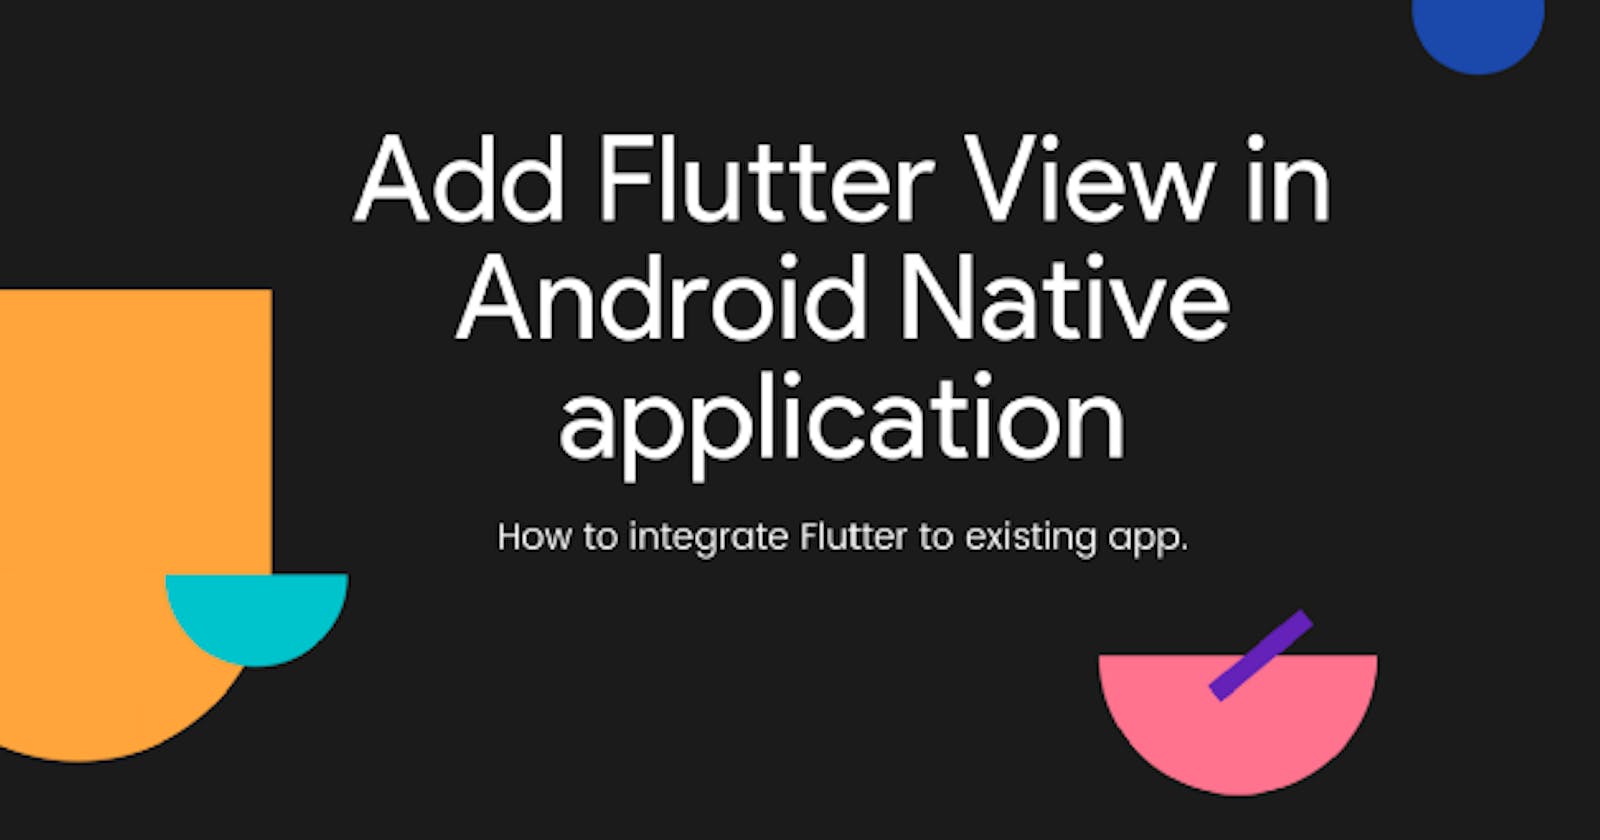 Add Flutter View to Native Android Application